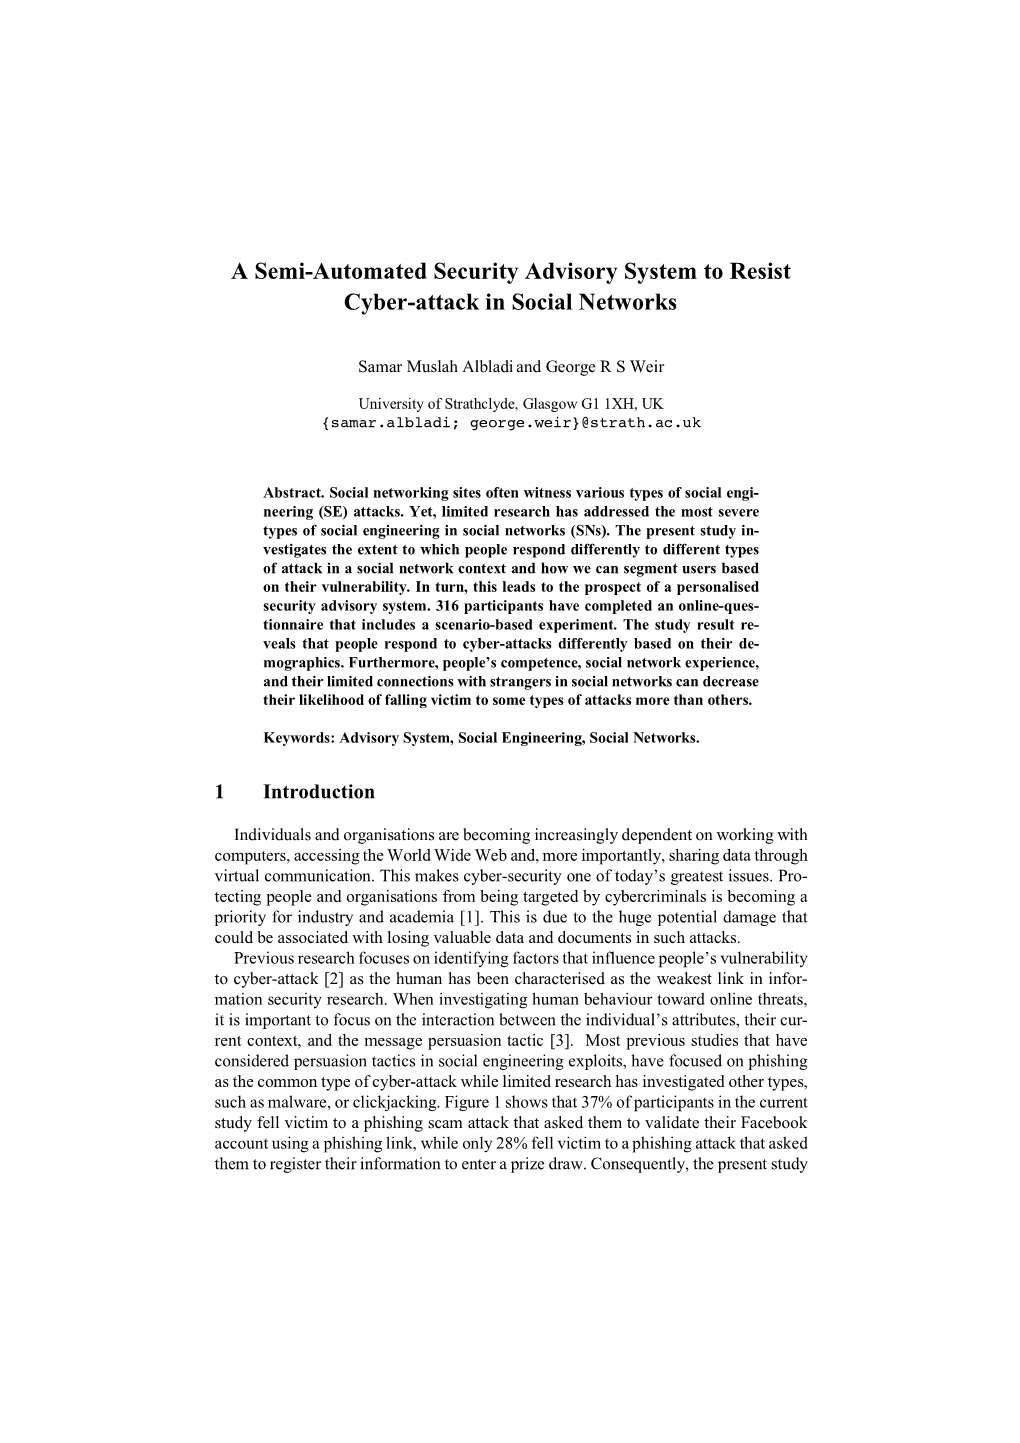 A Semi-Automated Security Advisory System to Resist Cyber-Attack in Social Networks